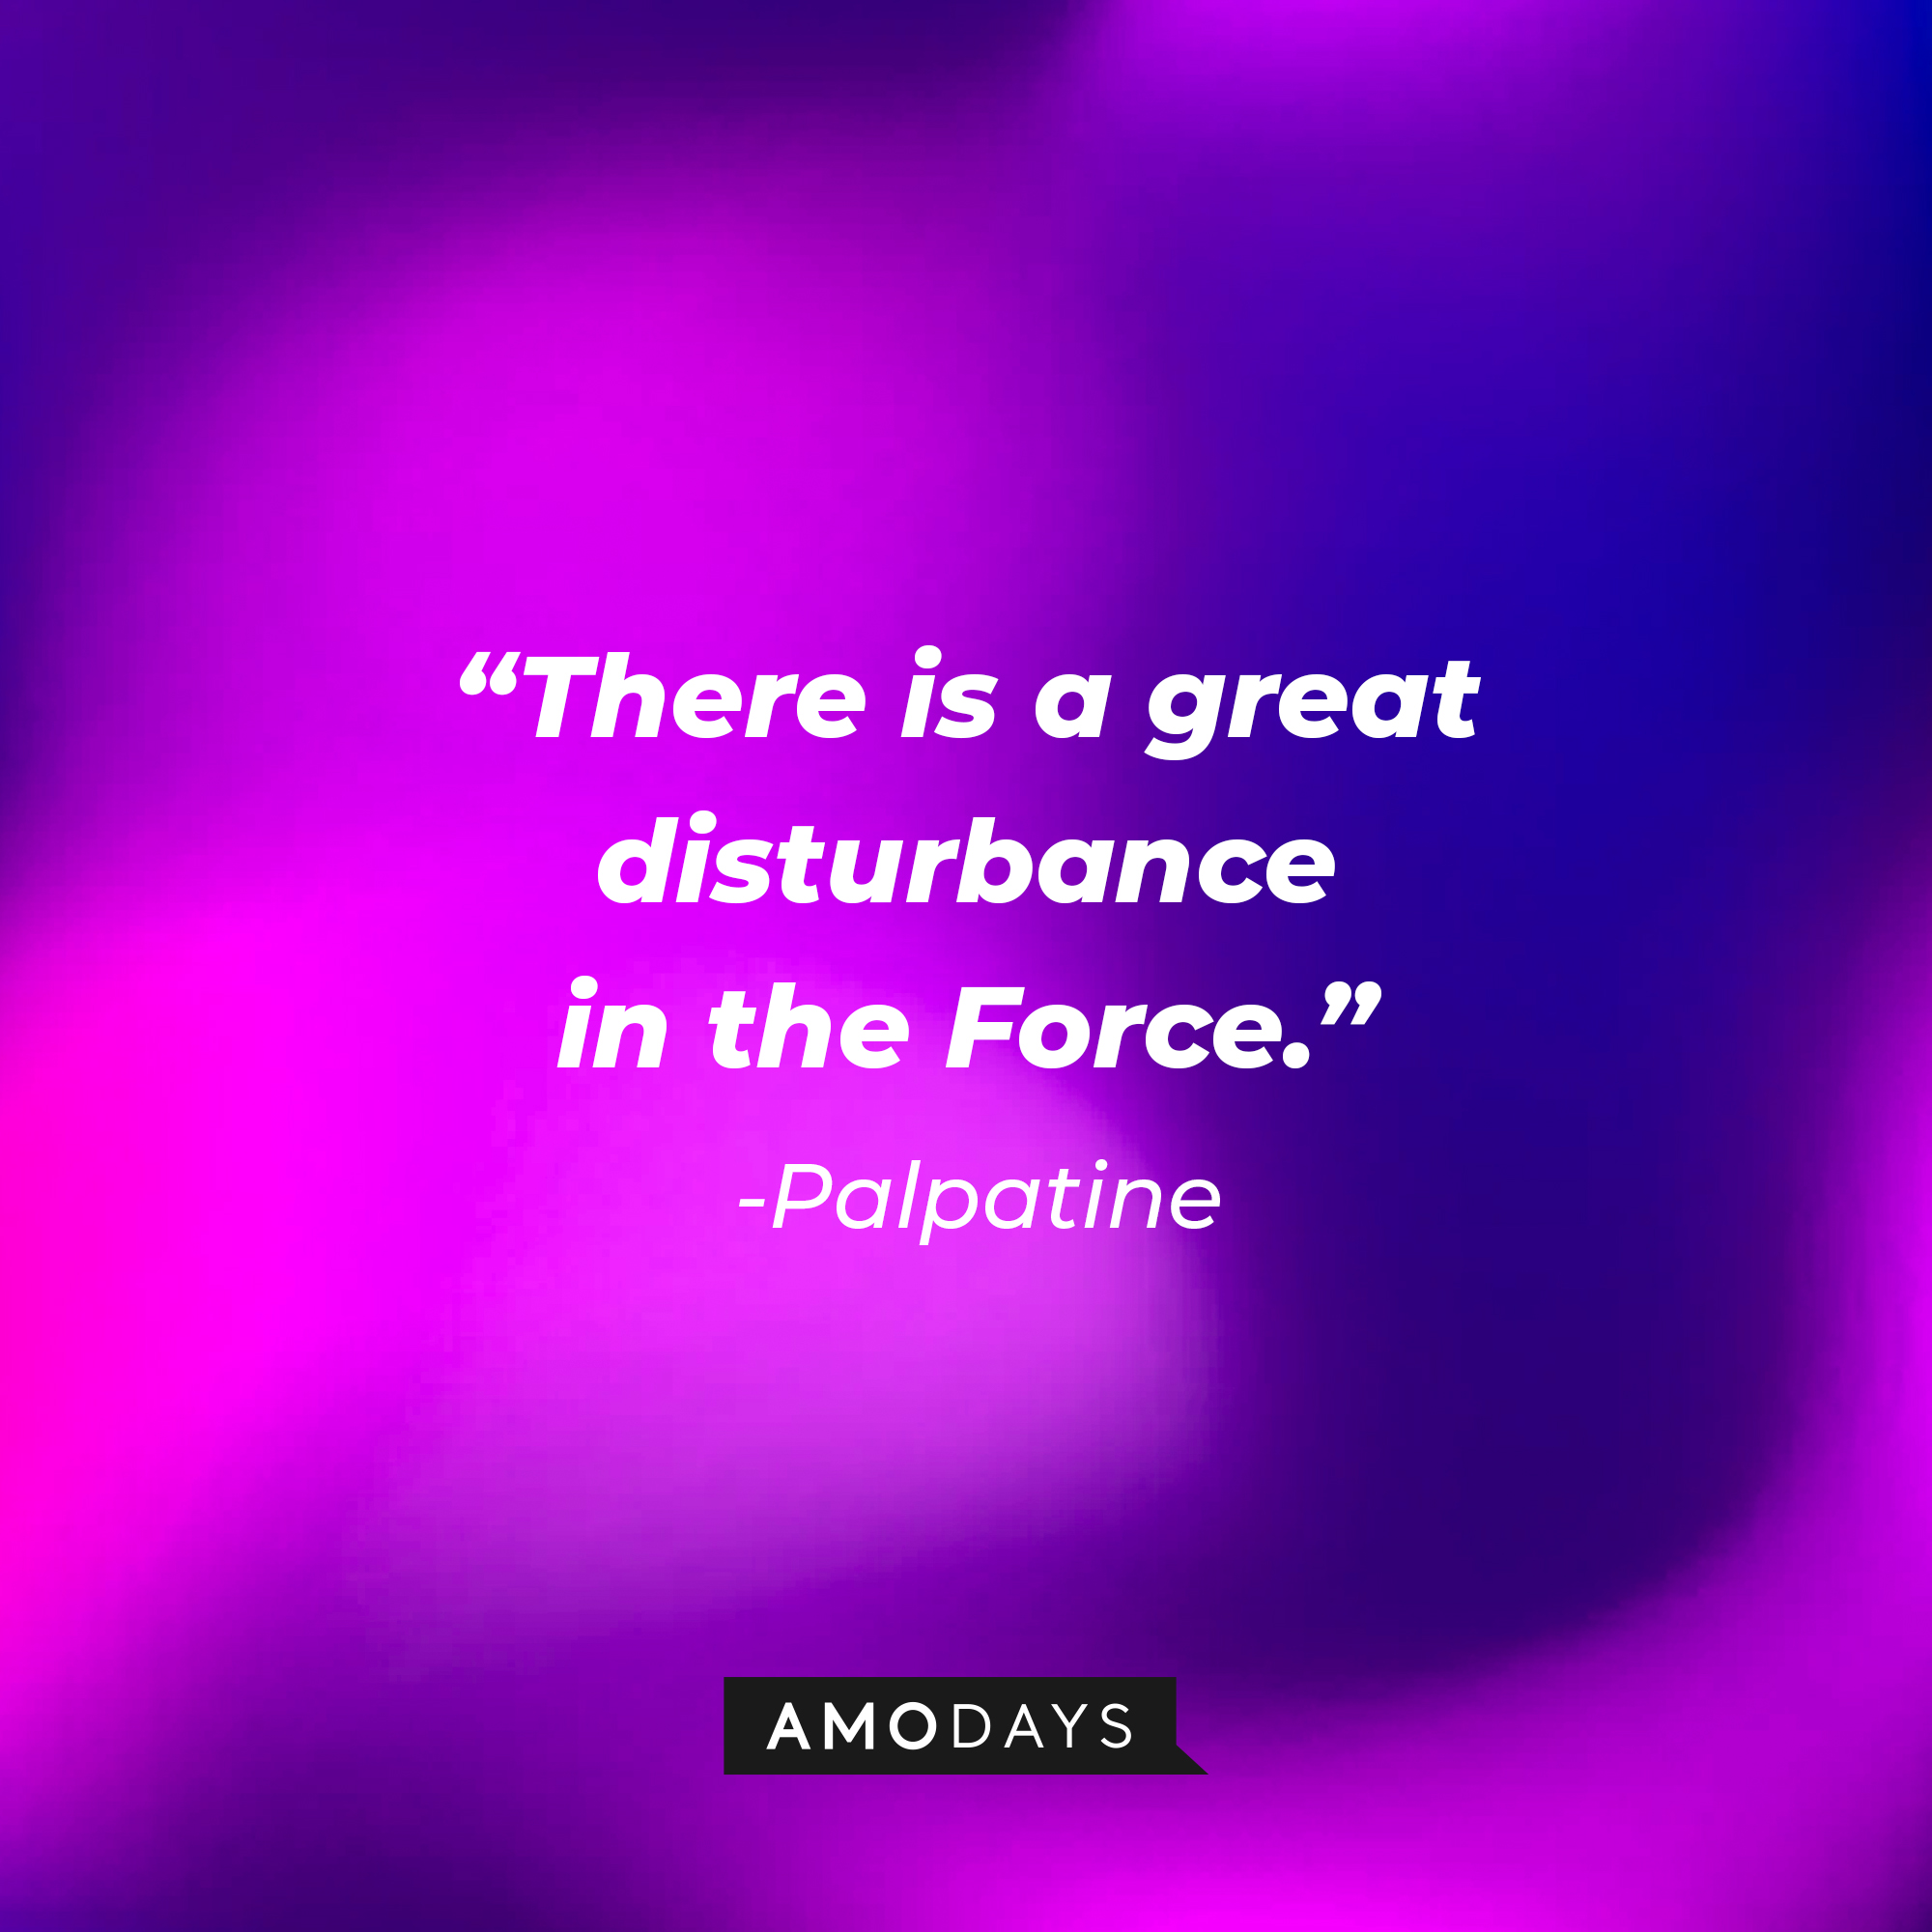 Palpatine’s quote: "There is a great disturbance in the Force.”  | Source: AmoDays